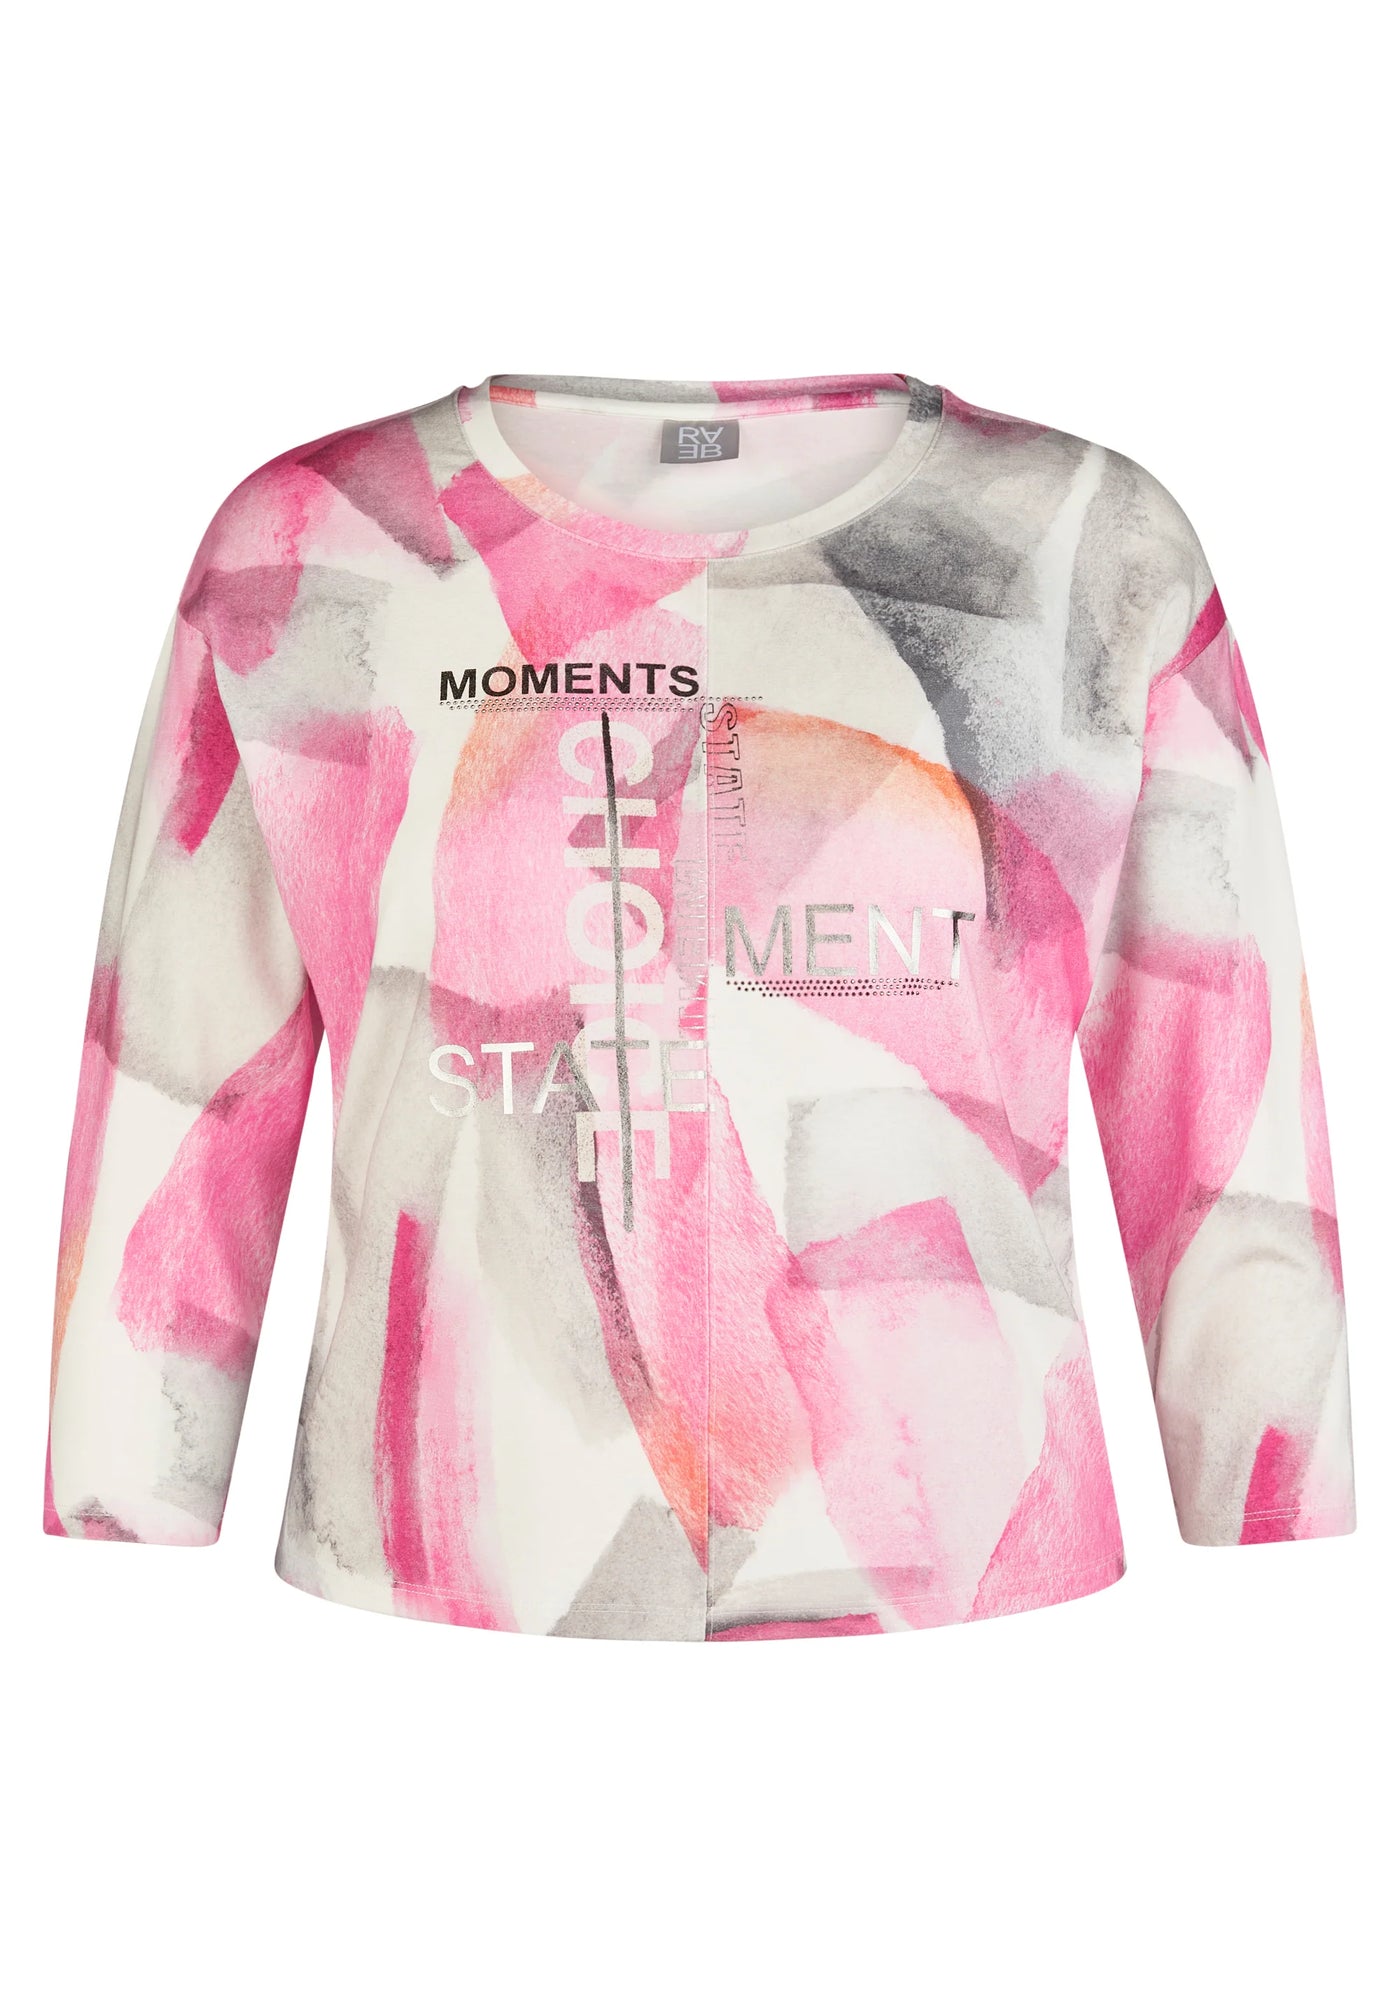 Pink, Grey and White Abstract Print Top